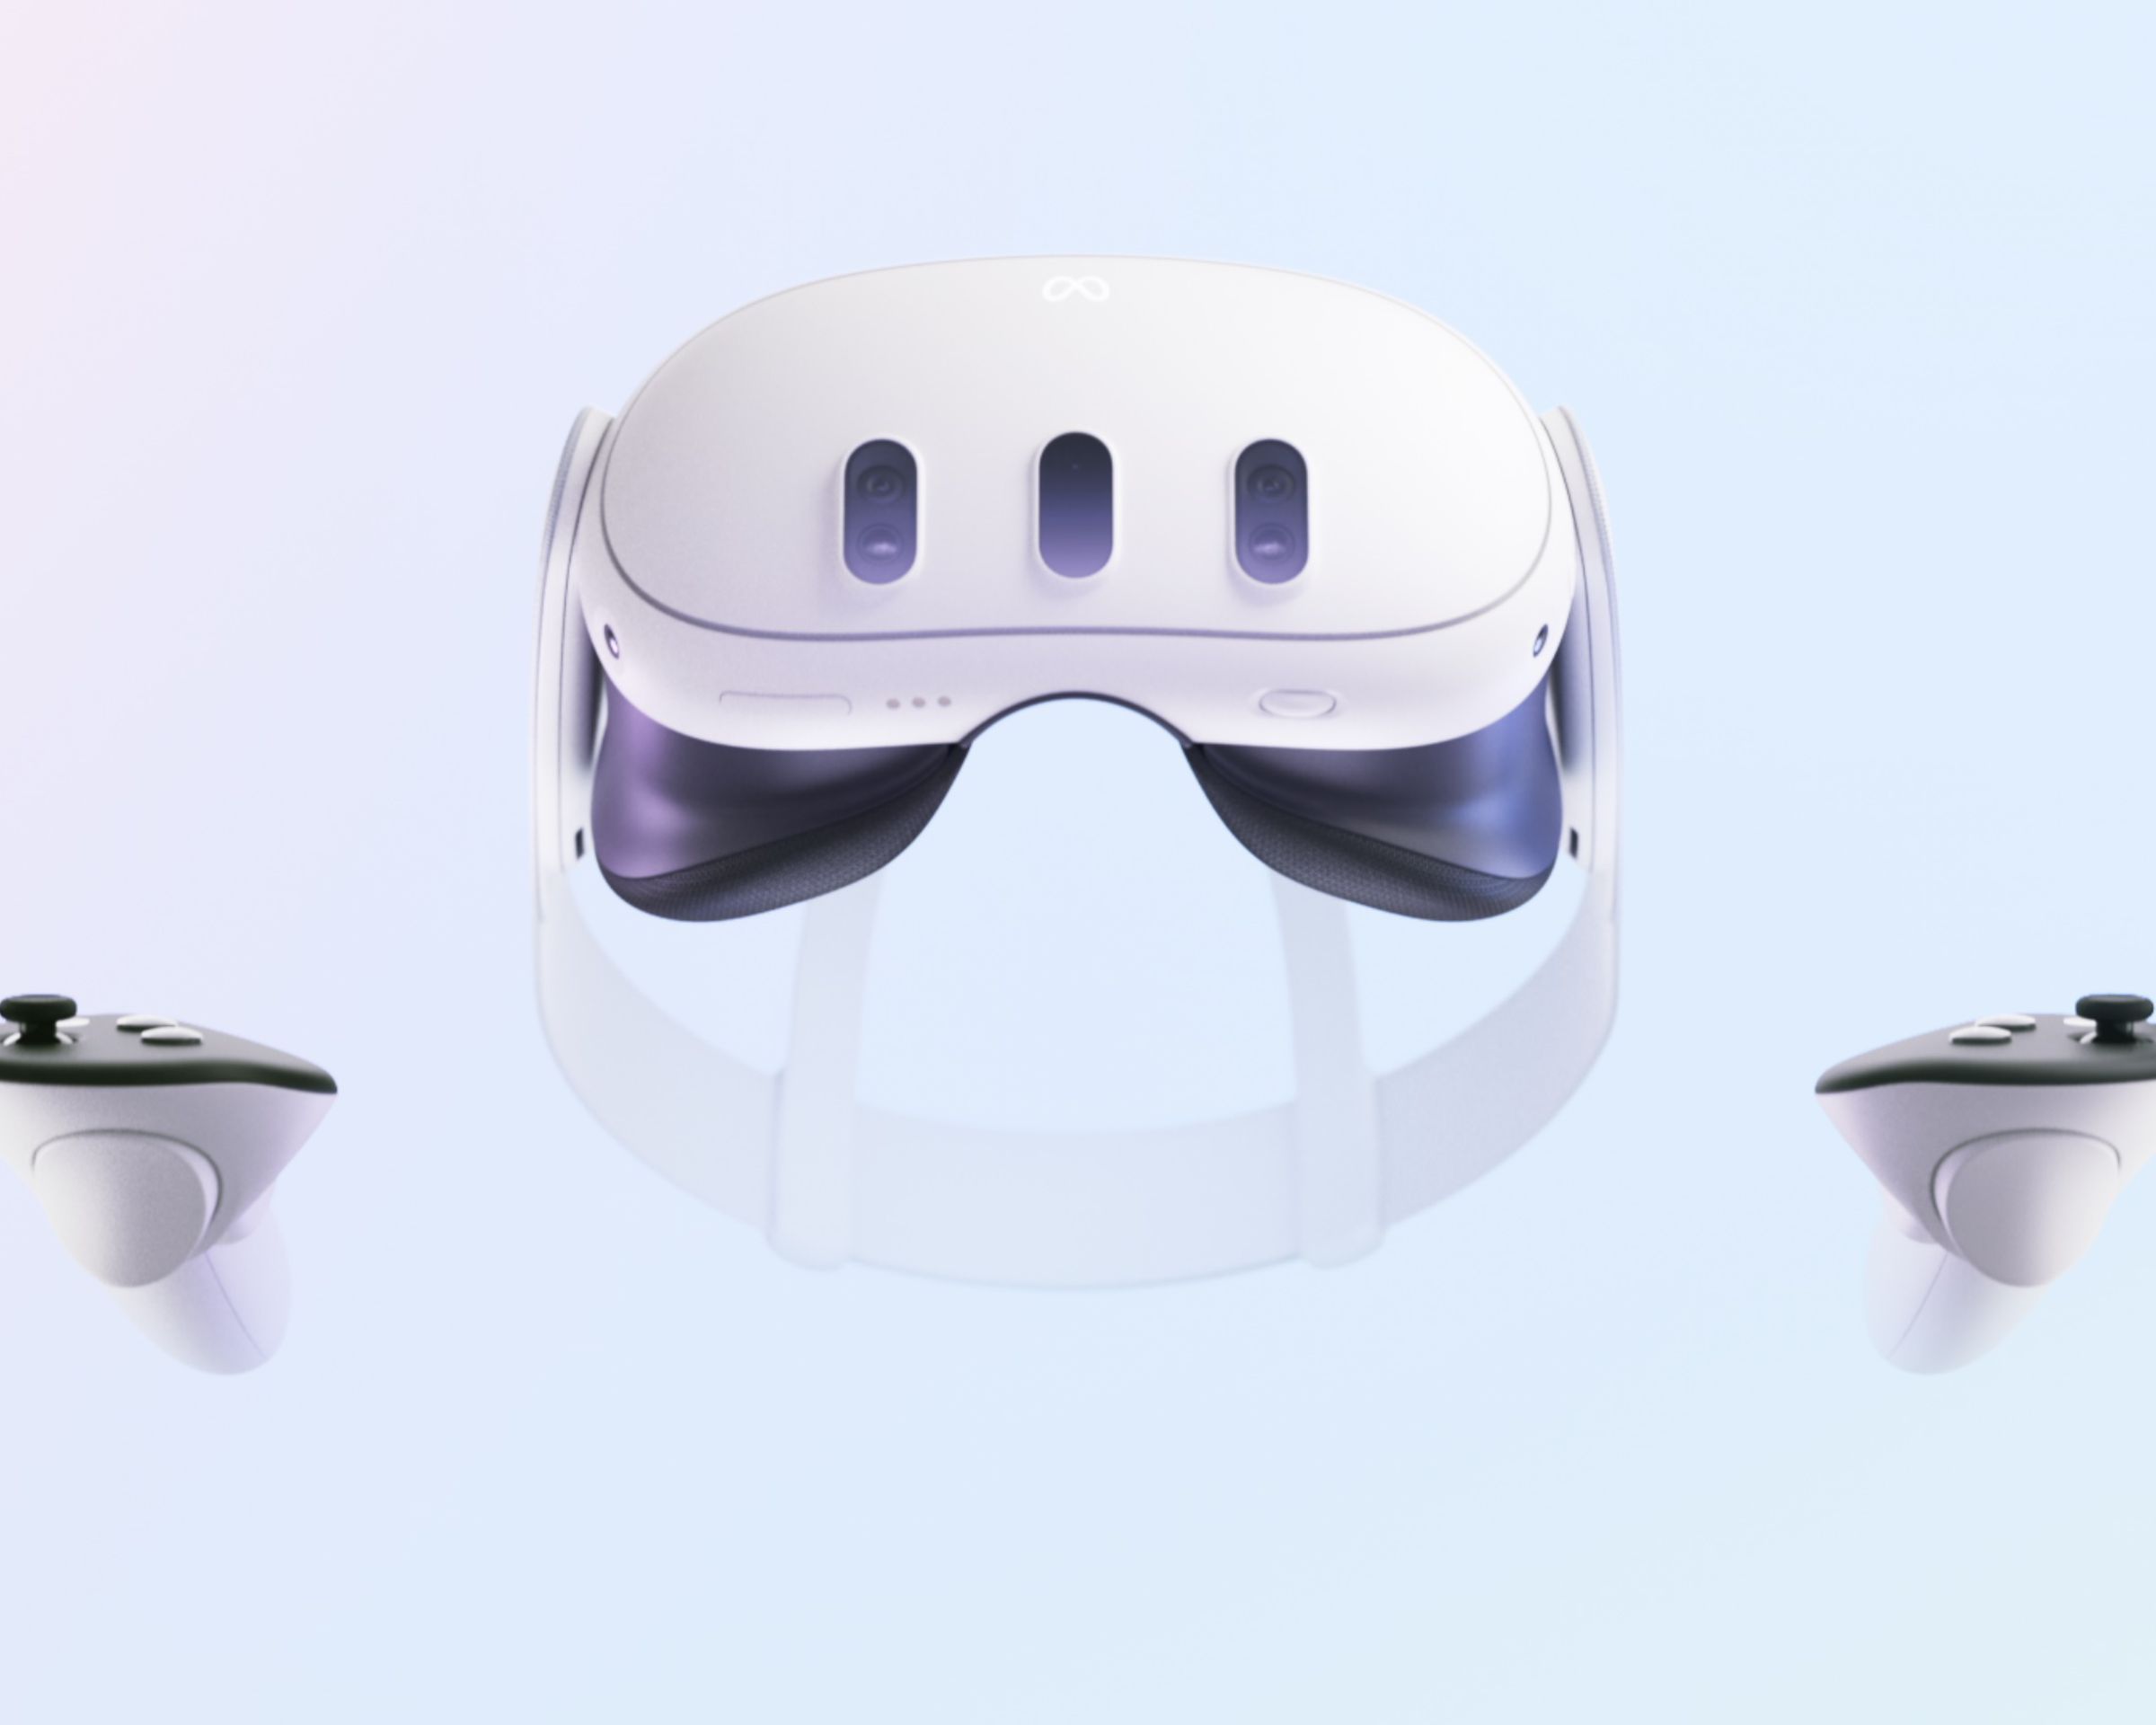 Meta Quest 3 VR headset shown floating, along with two handheld VR controllers